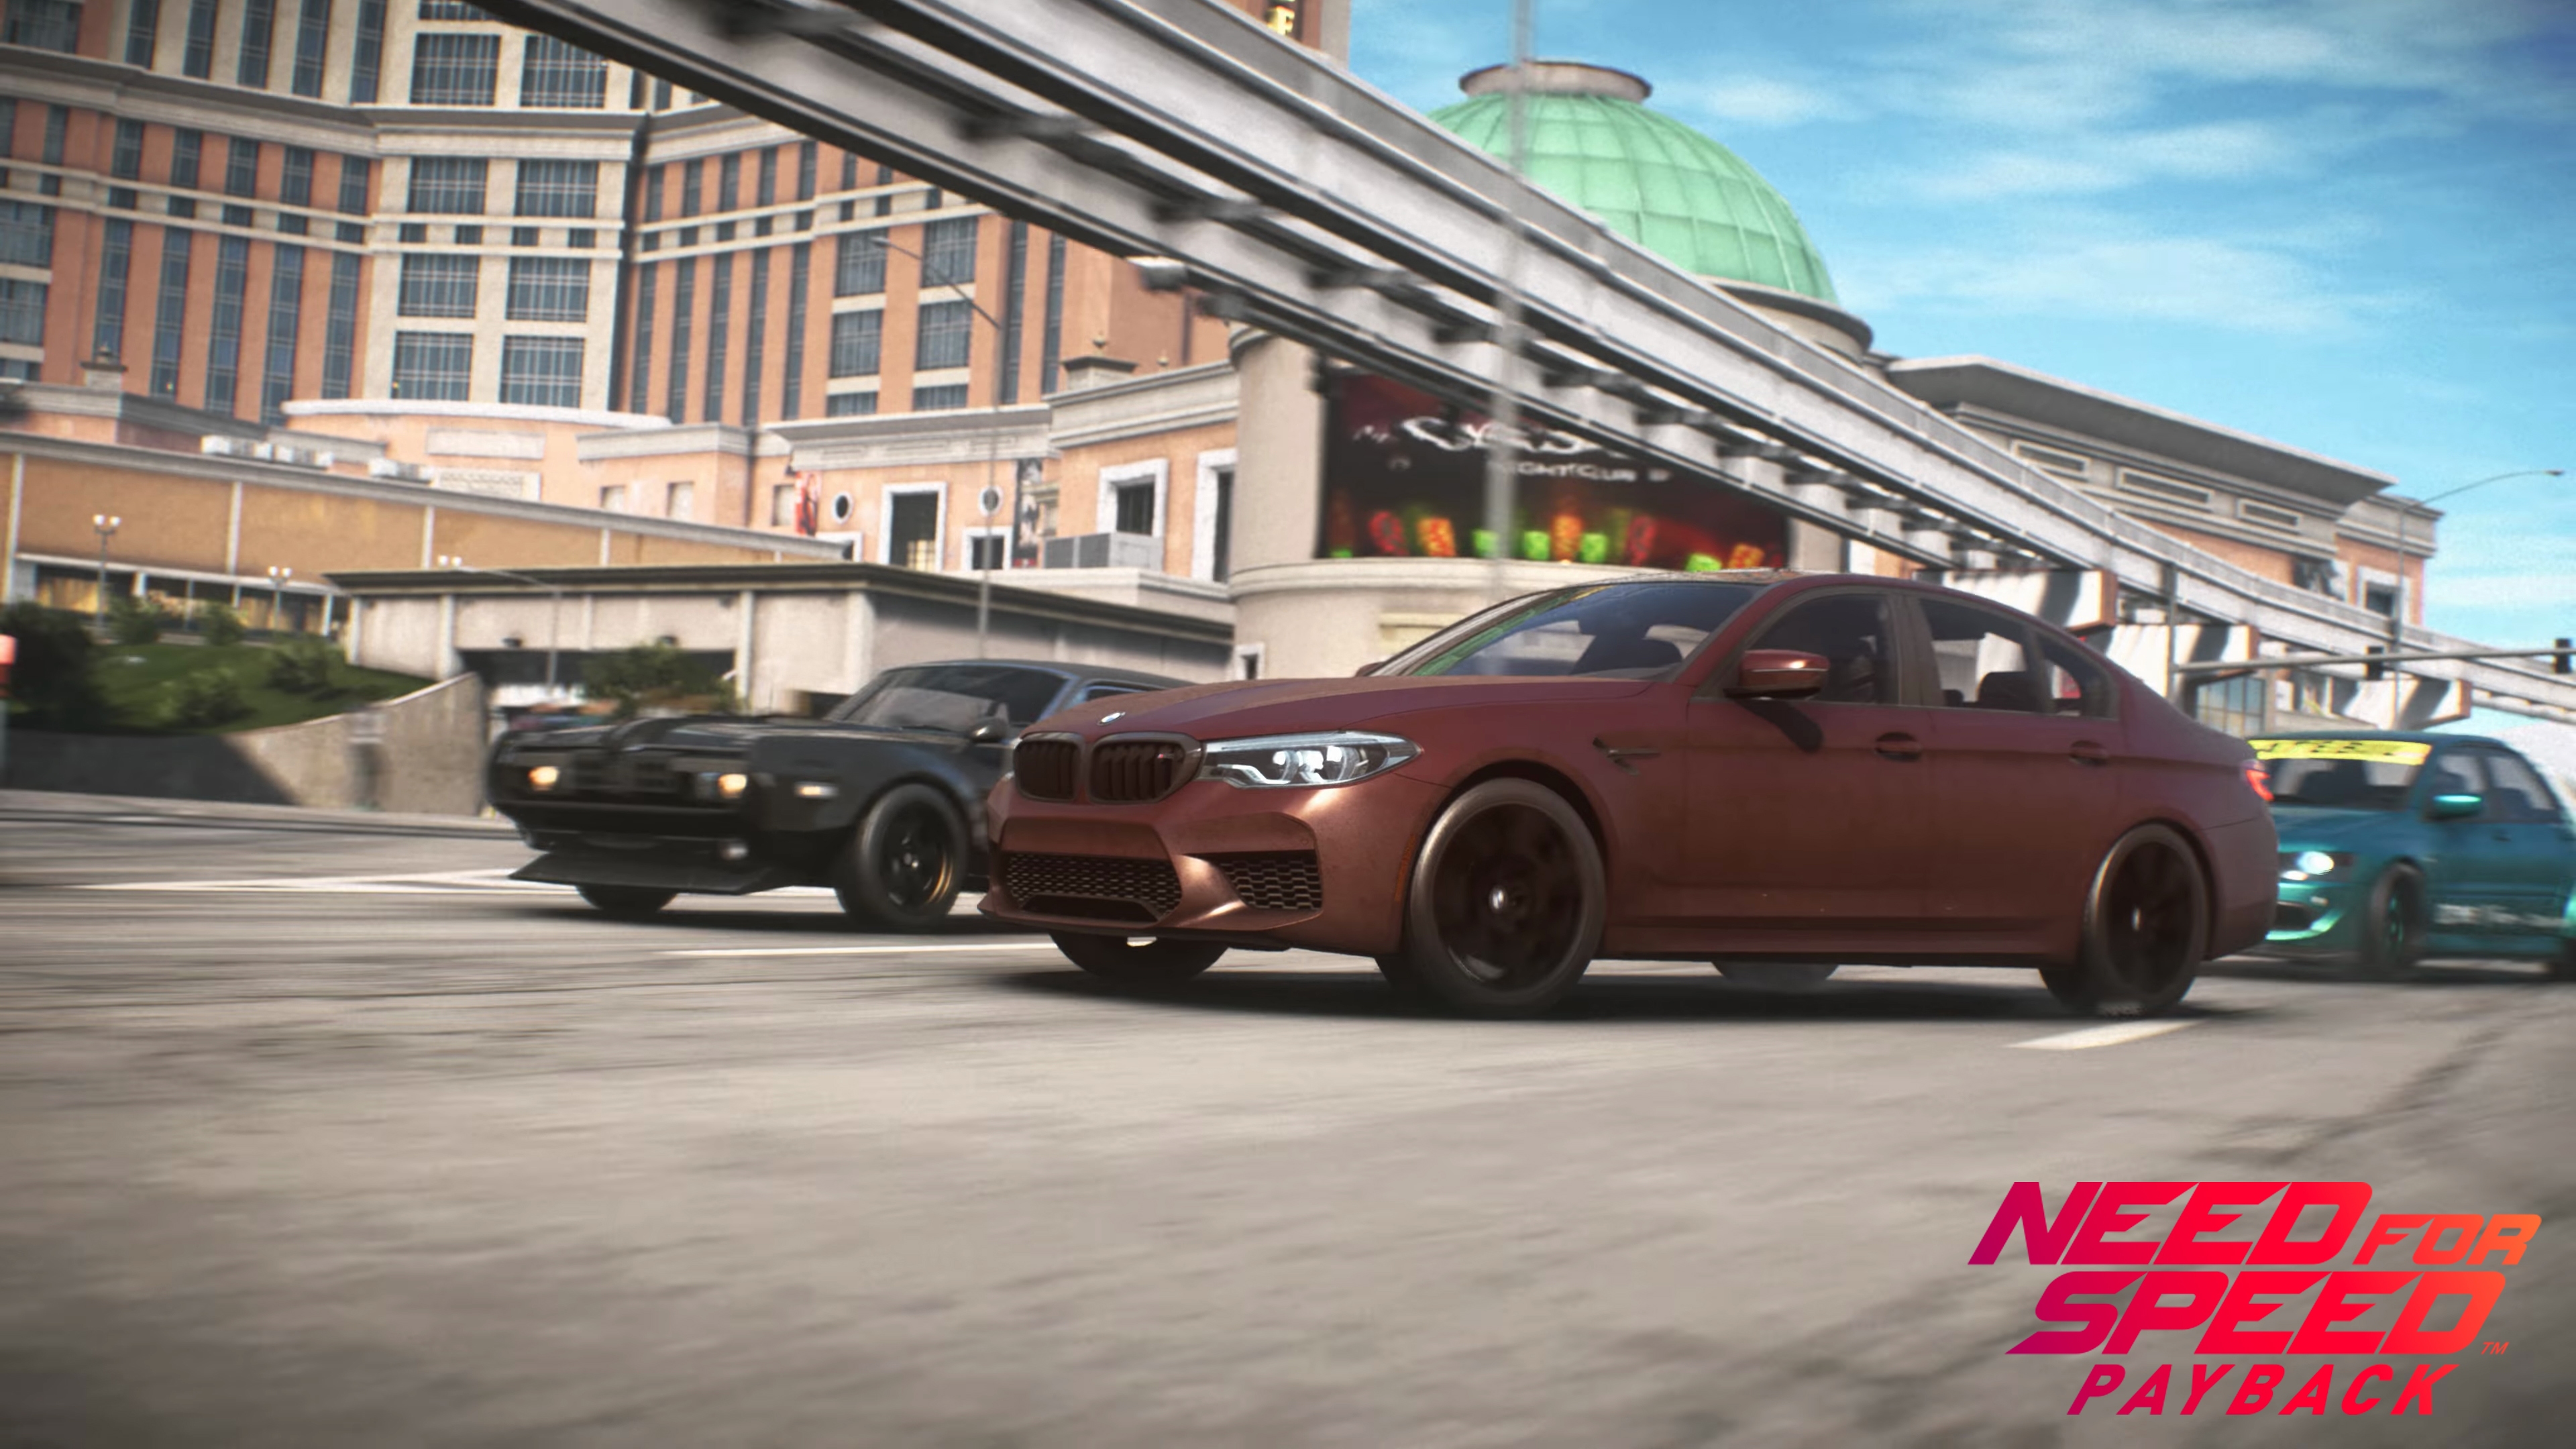 Bmw Bmw M5 Car Need For Speed Need For Speed Payback 3840x2160